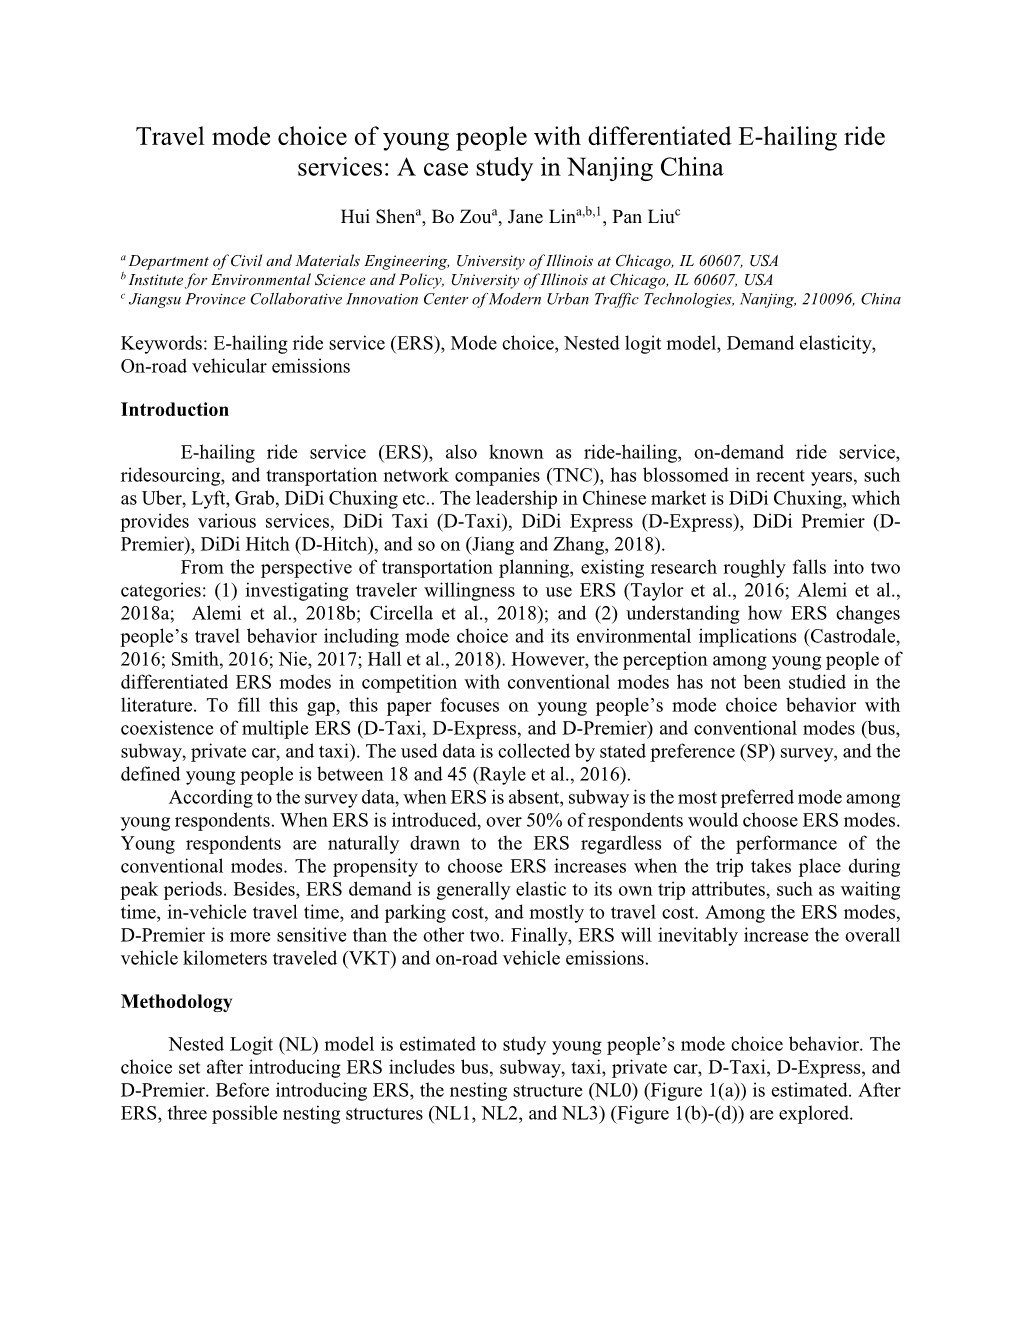 Travel Mode Choice of Young People with Differentiated E-Hailing Ride Services: a Case Study in Nanjing China